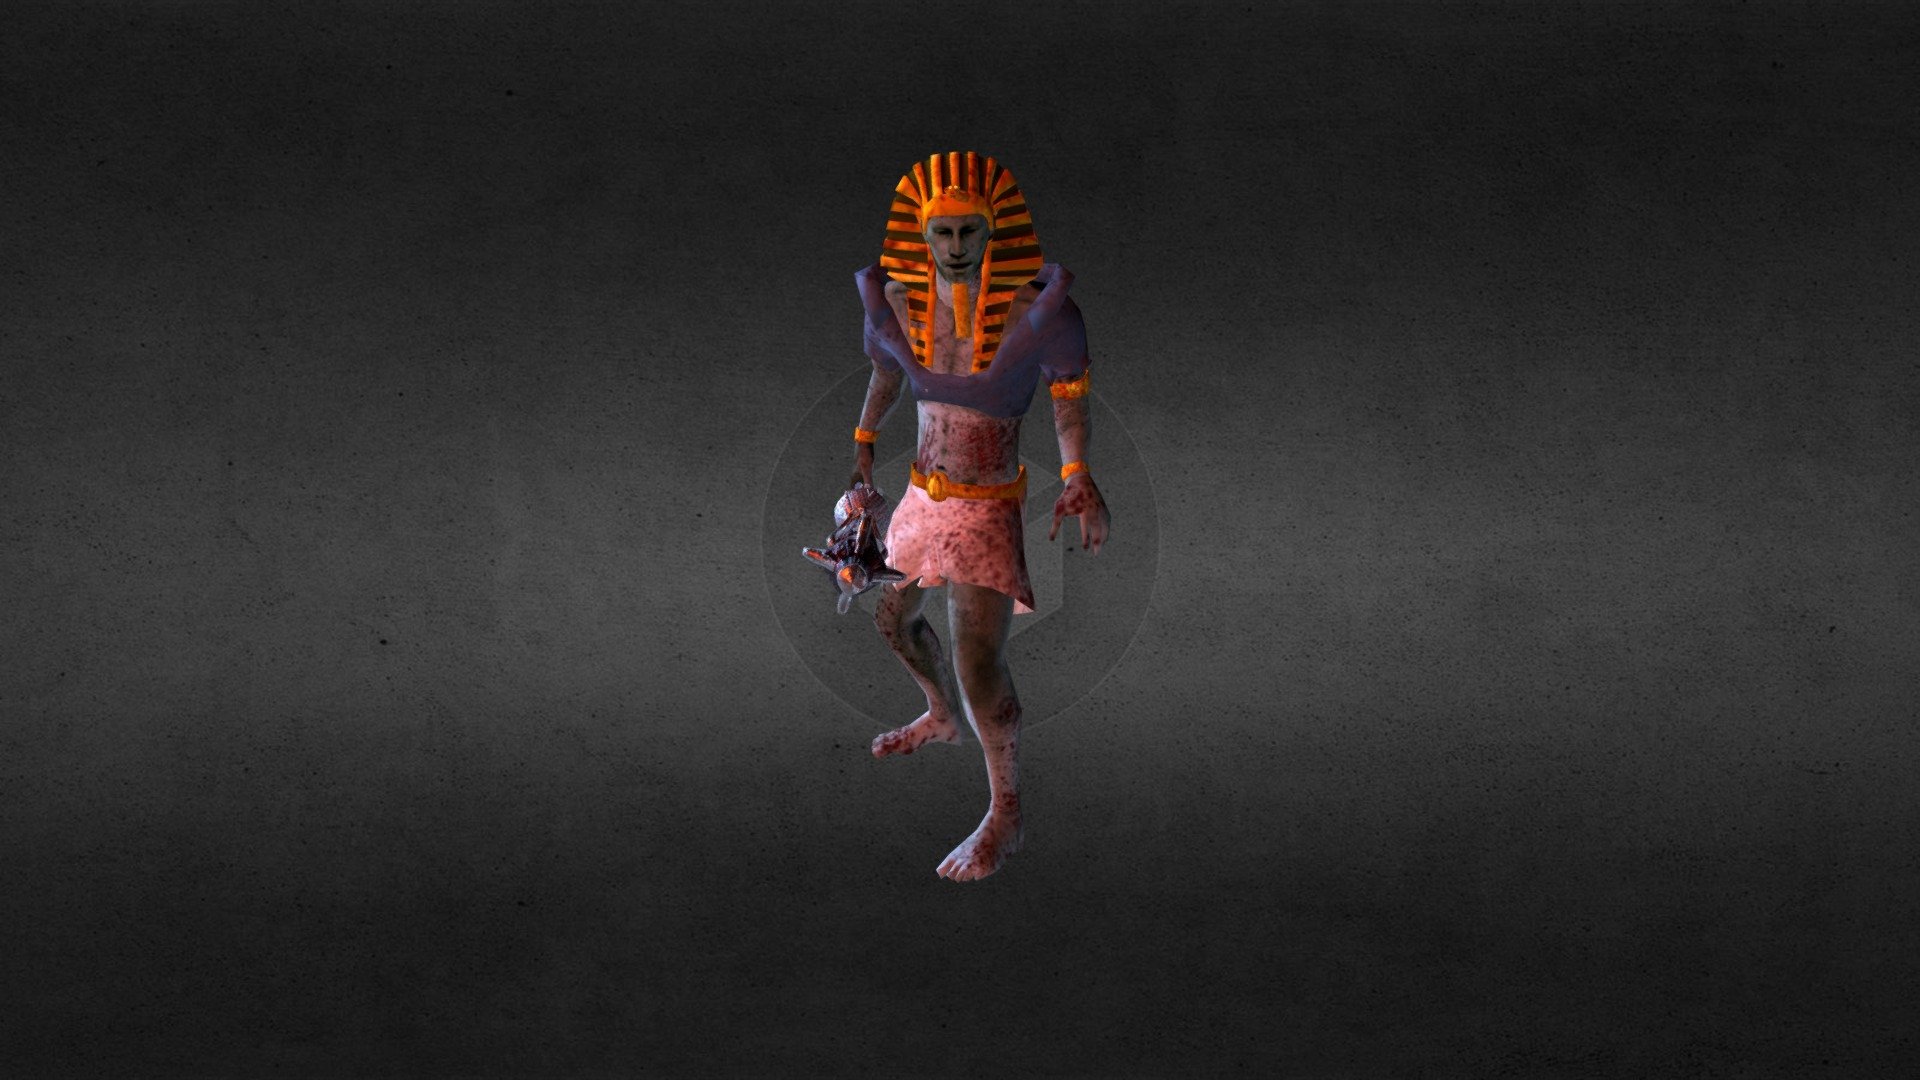 fully rigged and animated Low Poly Pharao

https://www.youtube.com/watch?v=zQ8jCTFL9dw
https://7daystodie.com/forums/showthread.php?109732-Curse-of-Anubis-Prefab-The-Sphinx - Pharao - 3D model by Joel (@JoelKilb) 3d model